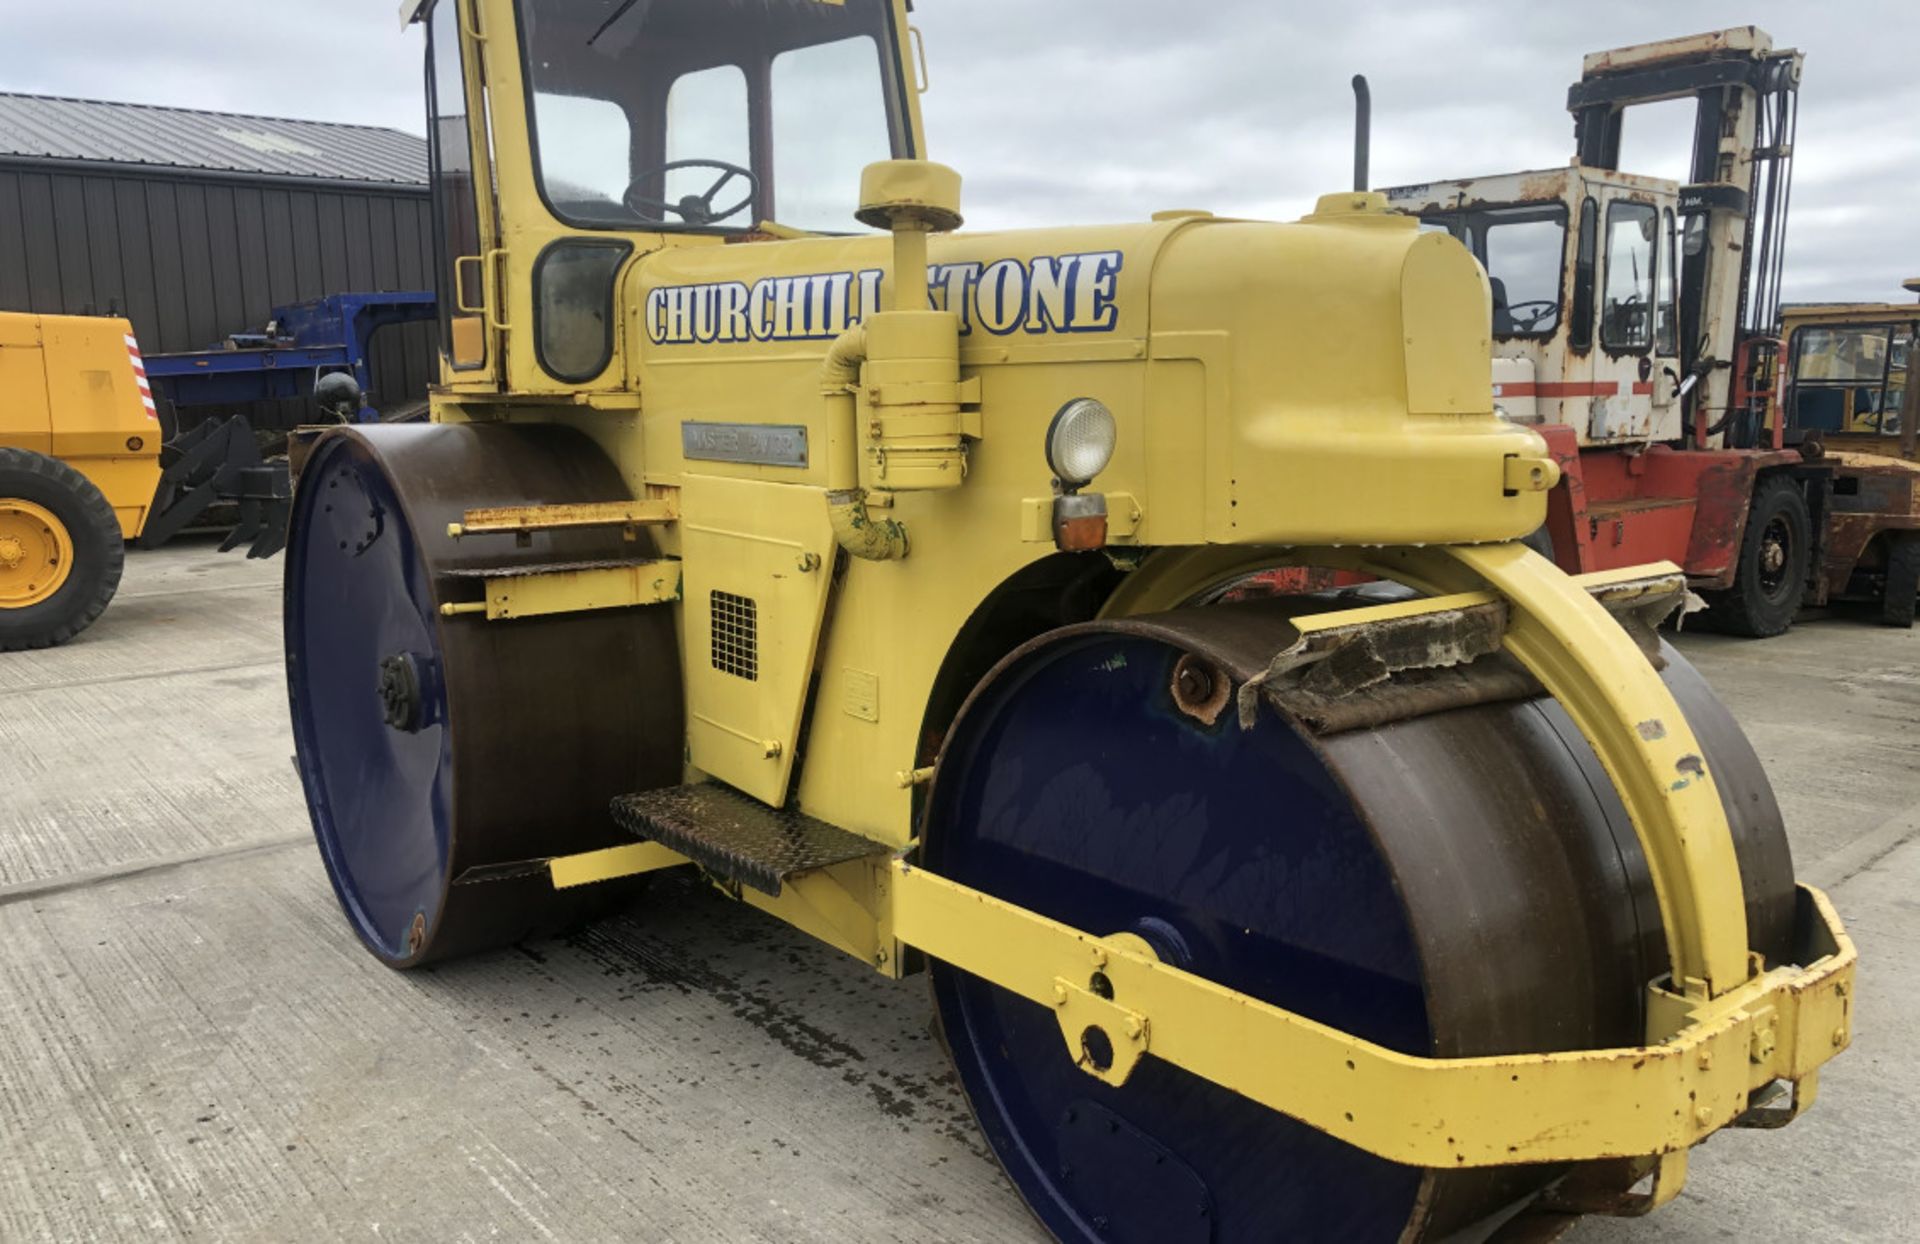 AVELING BARFORD DC12 3 PIN DEAD WEIGHT TARMAC ROLL